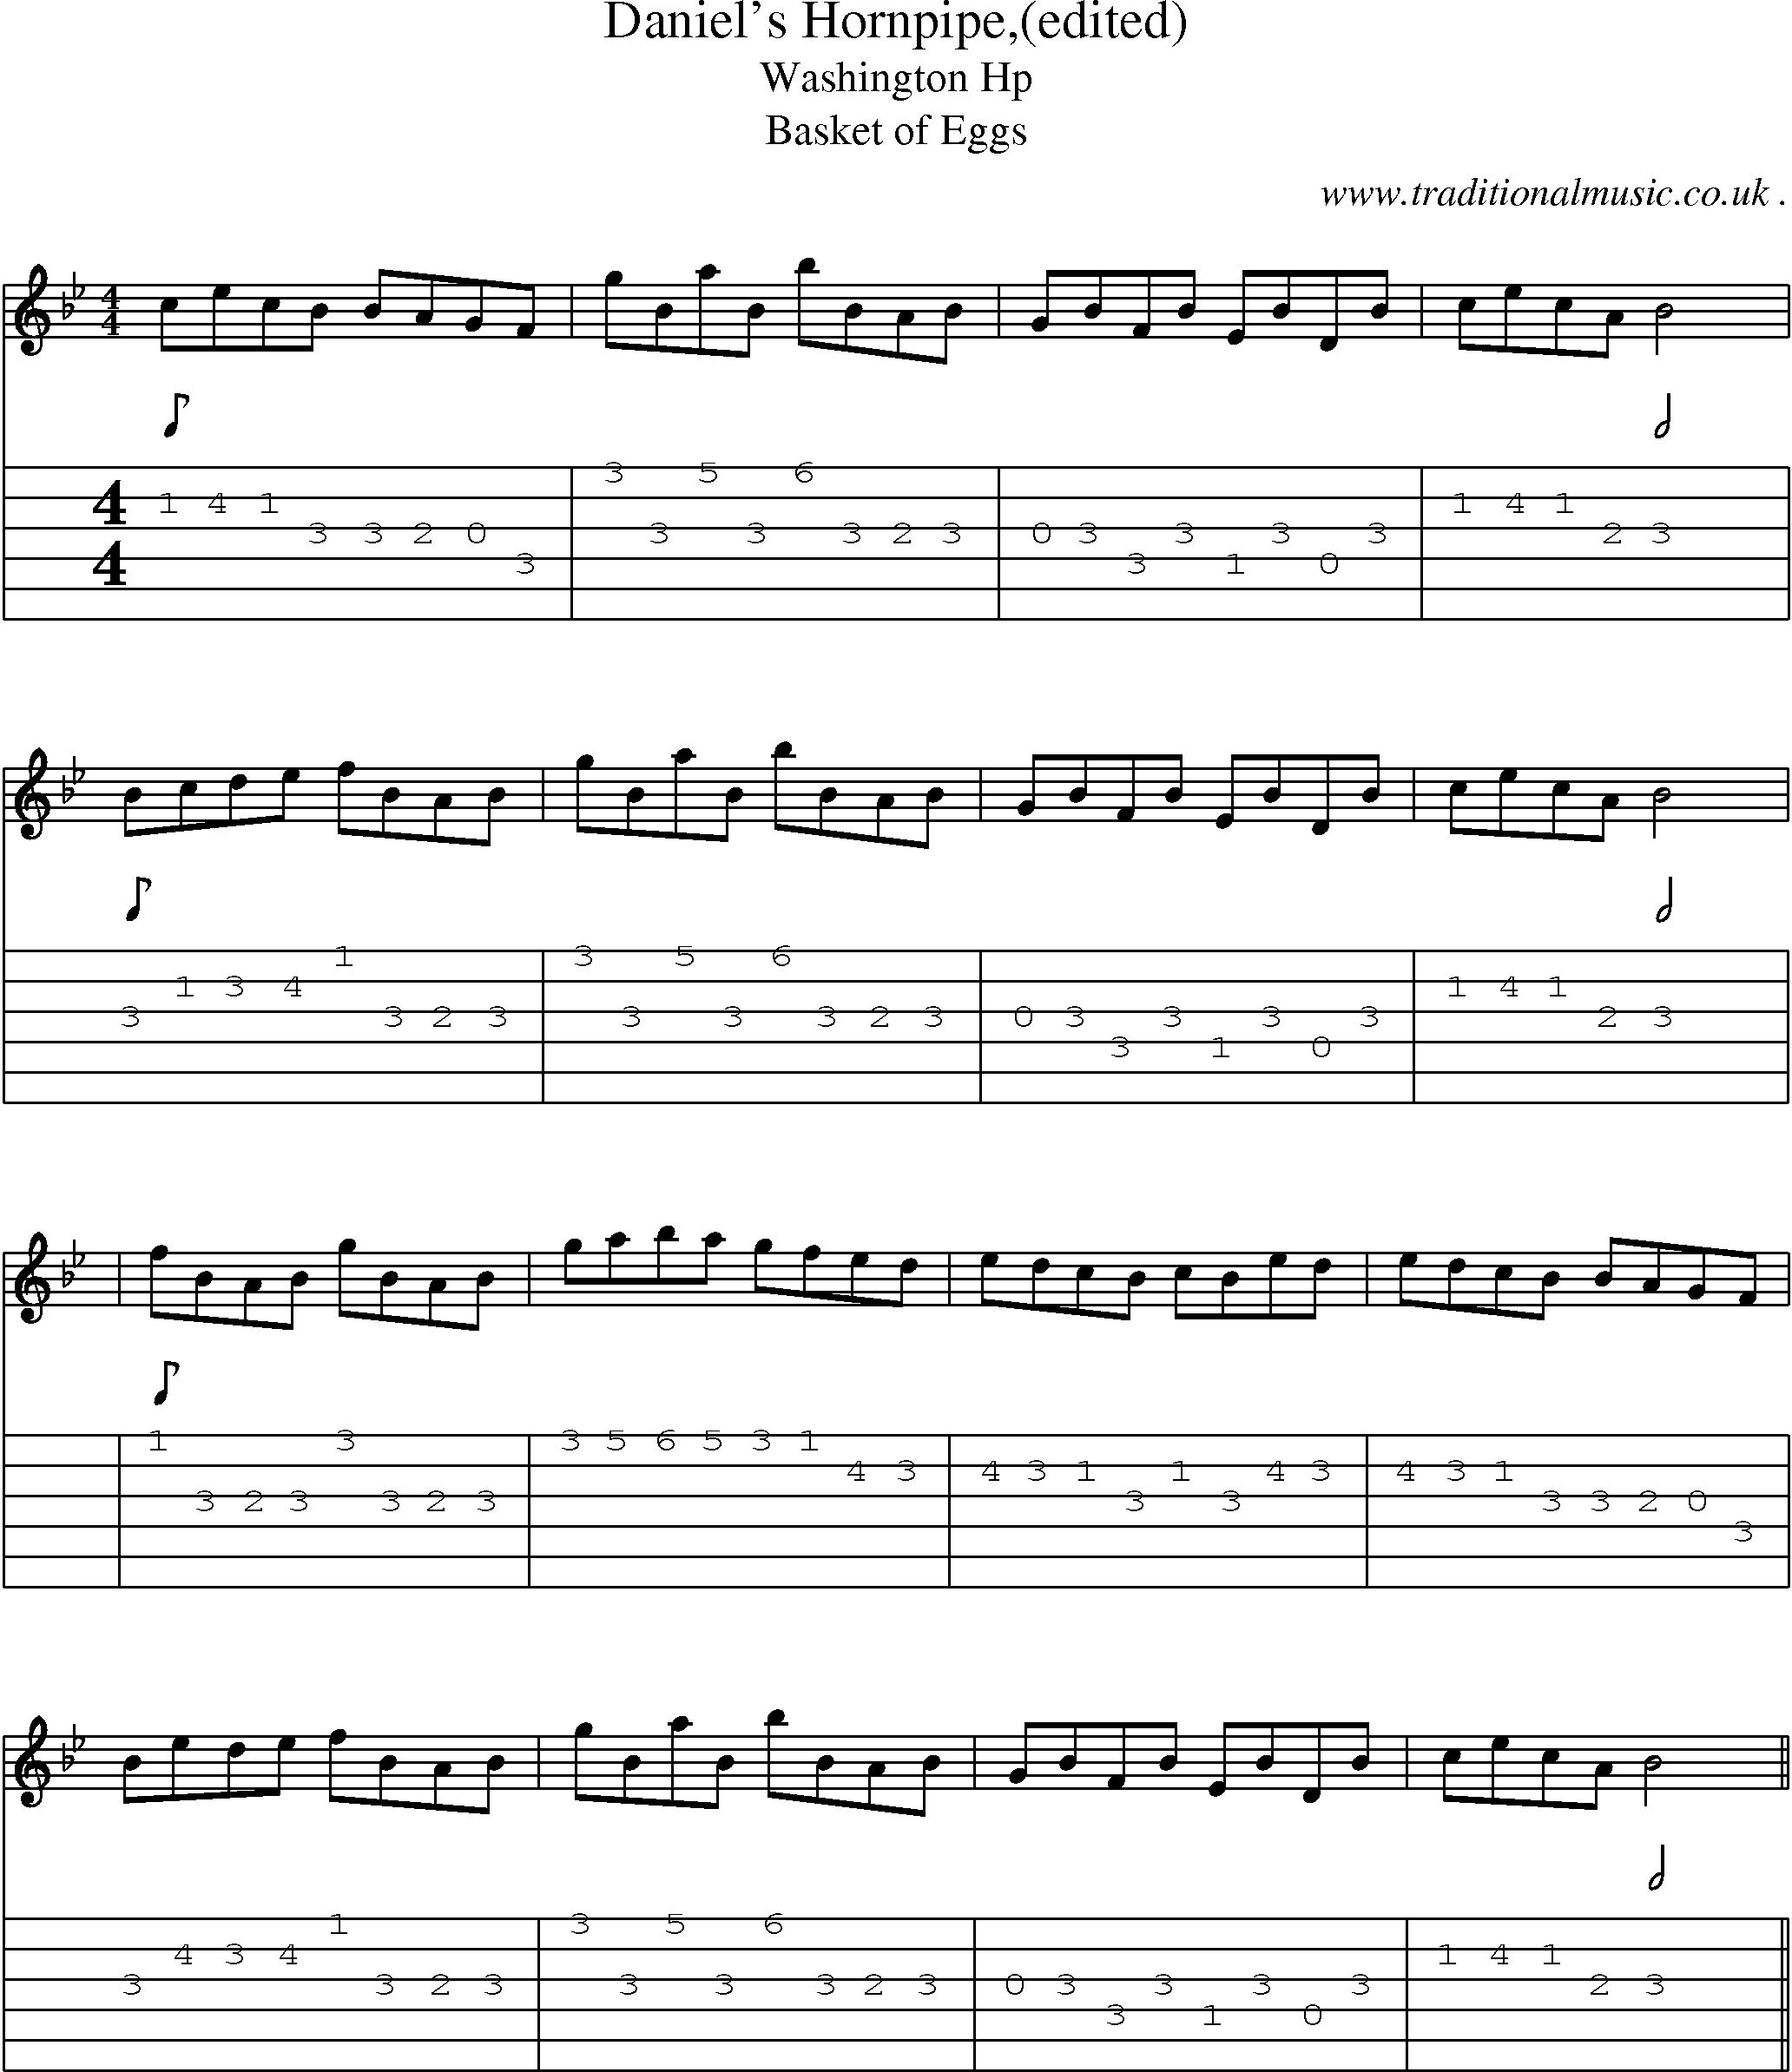 Sheet-Music and Guitar Tabs for Daniels Hornpipe(edited)